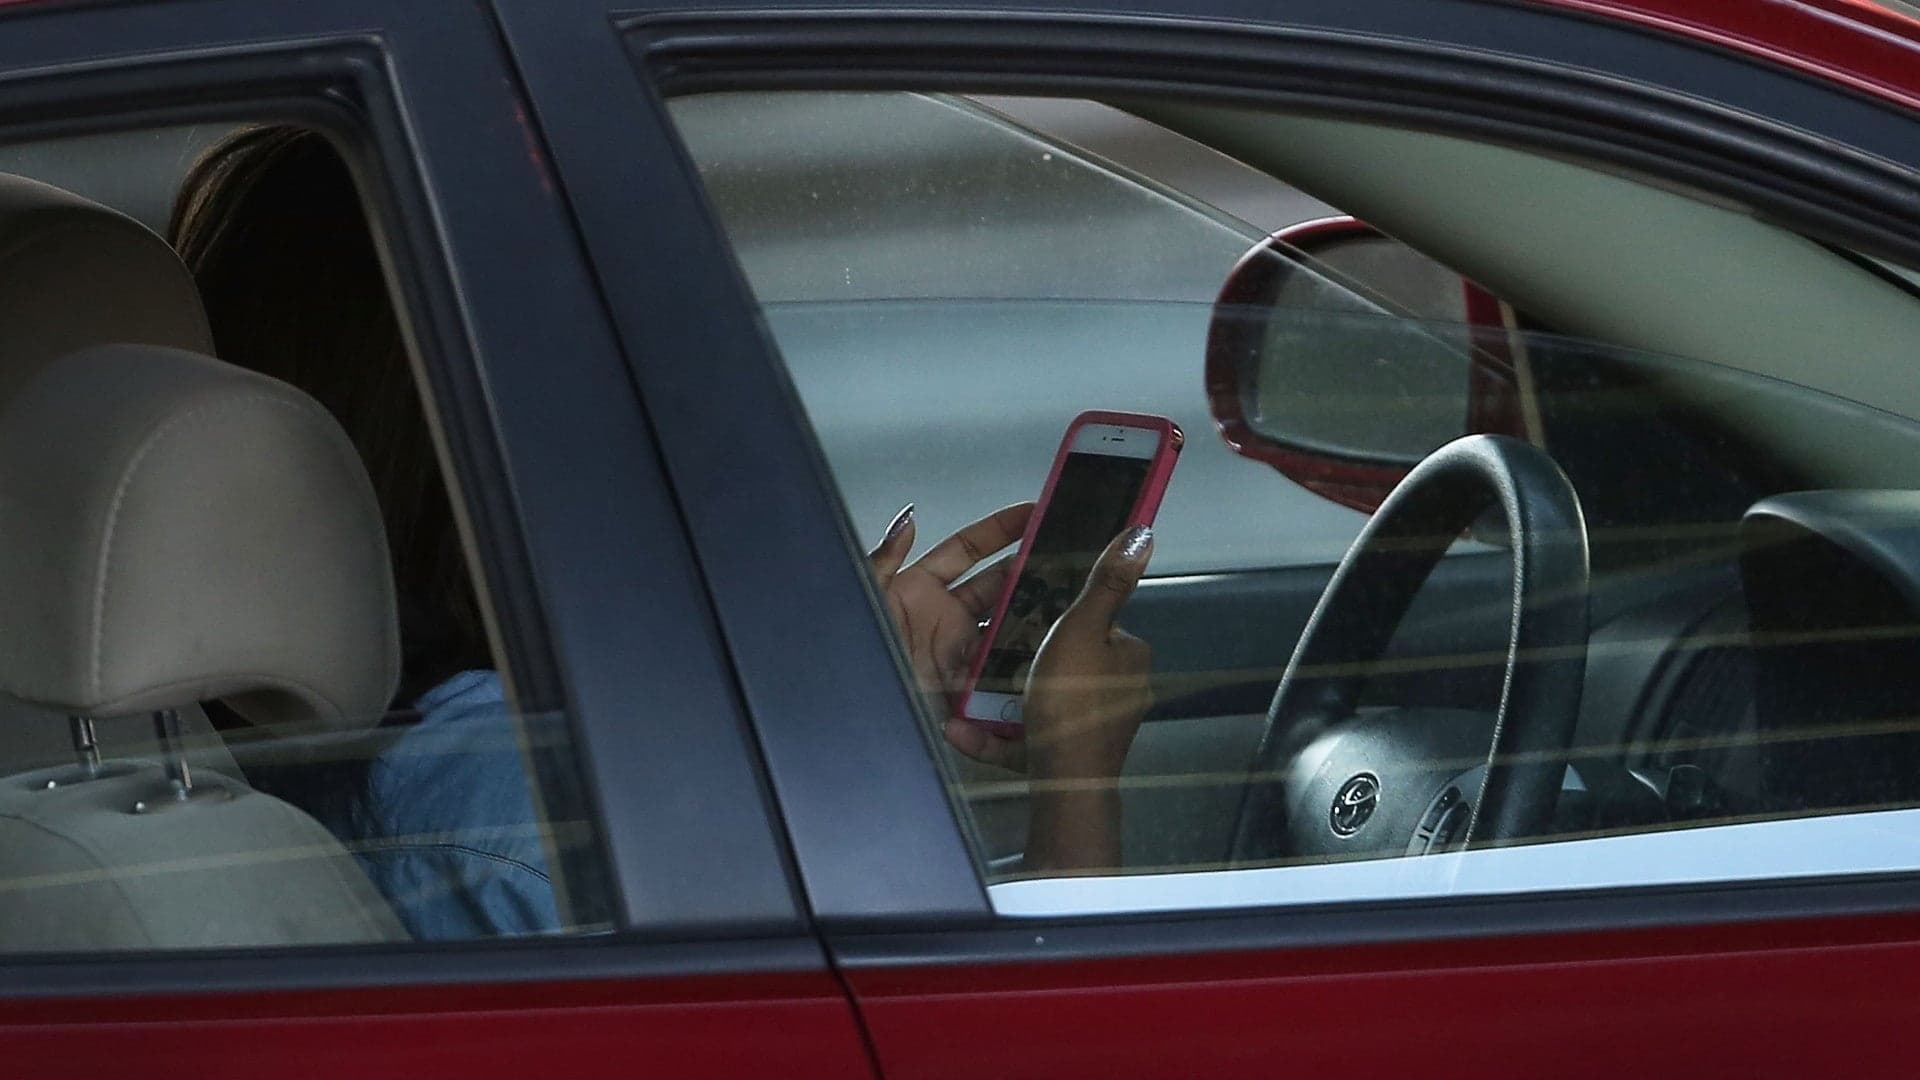 Washington State Targets All Forms of Distracted Driving With New ‘E-DUI’ Law